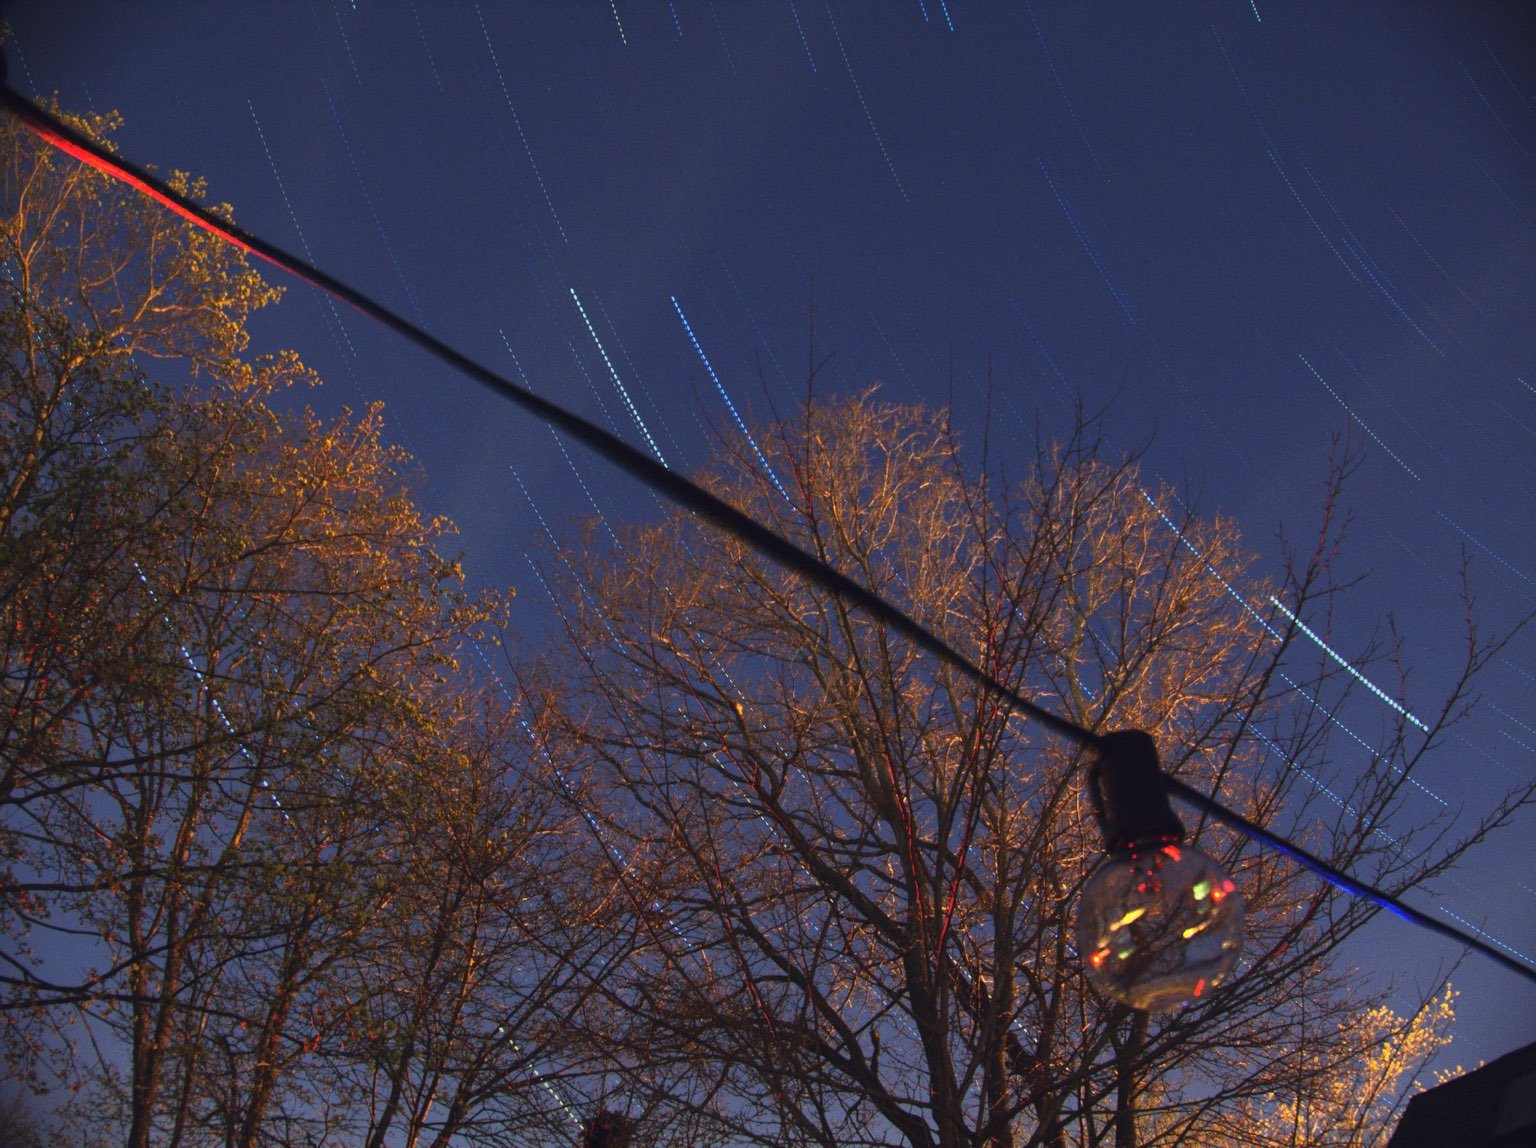 Star trails over trees in an urban backyard